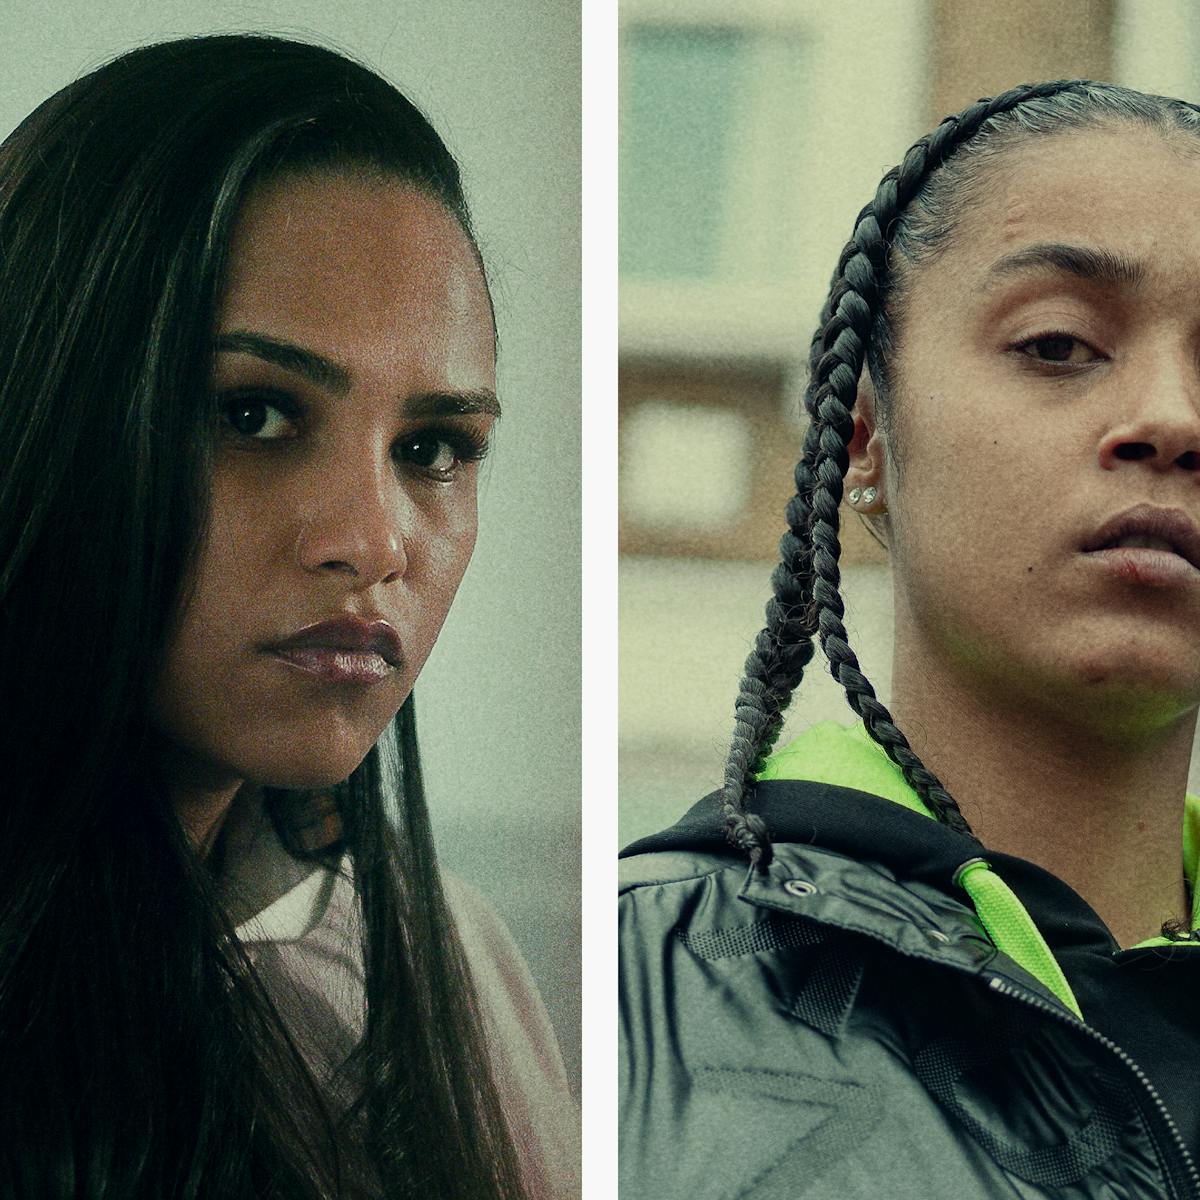 Saffron Hocking and Jasmine Jobson in a diptych. Hocking wears a dark top and Jobson wears a slippery-looking jacket with neon trimming. 